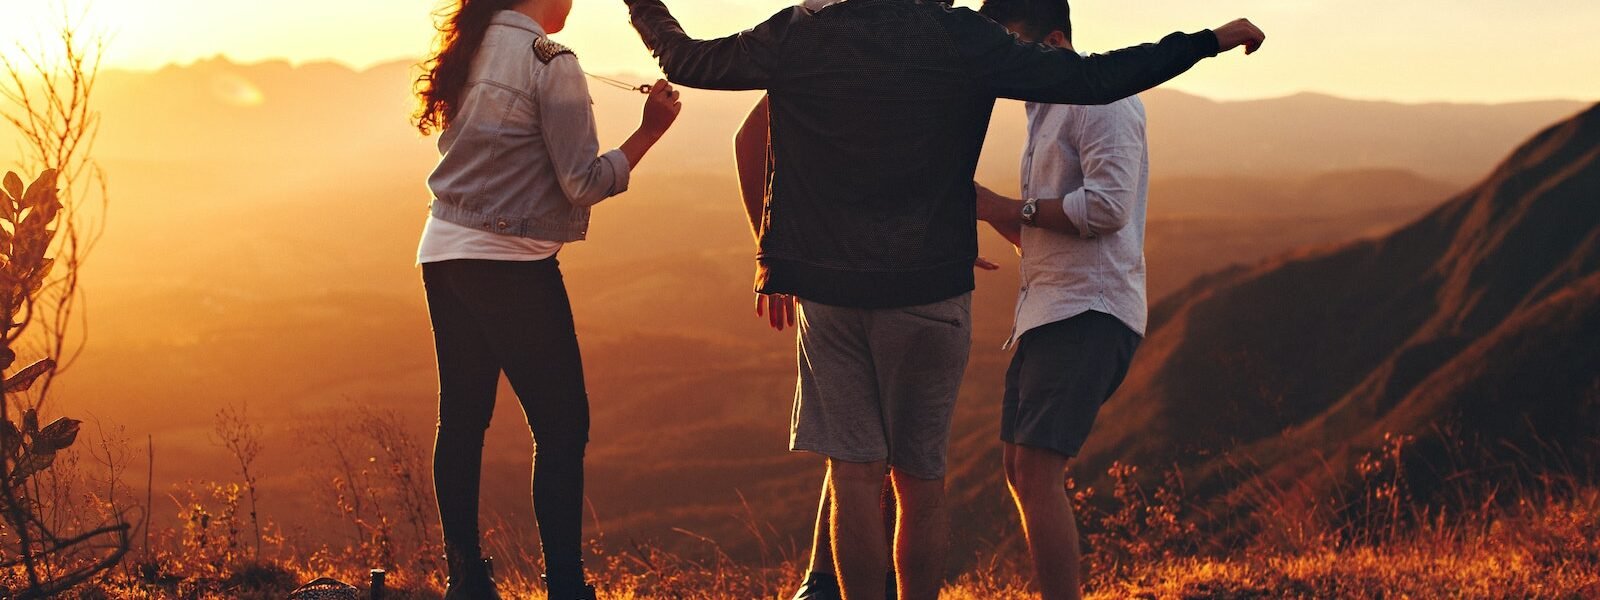 Four Person Standing at Top of Grassy Mountain